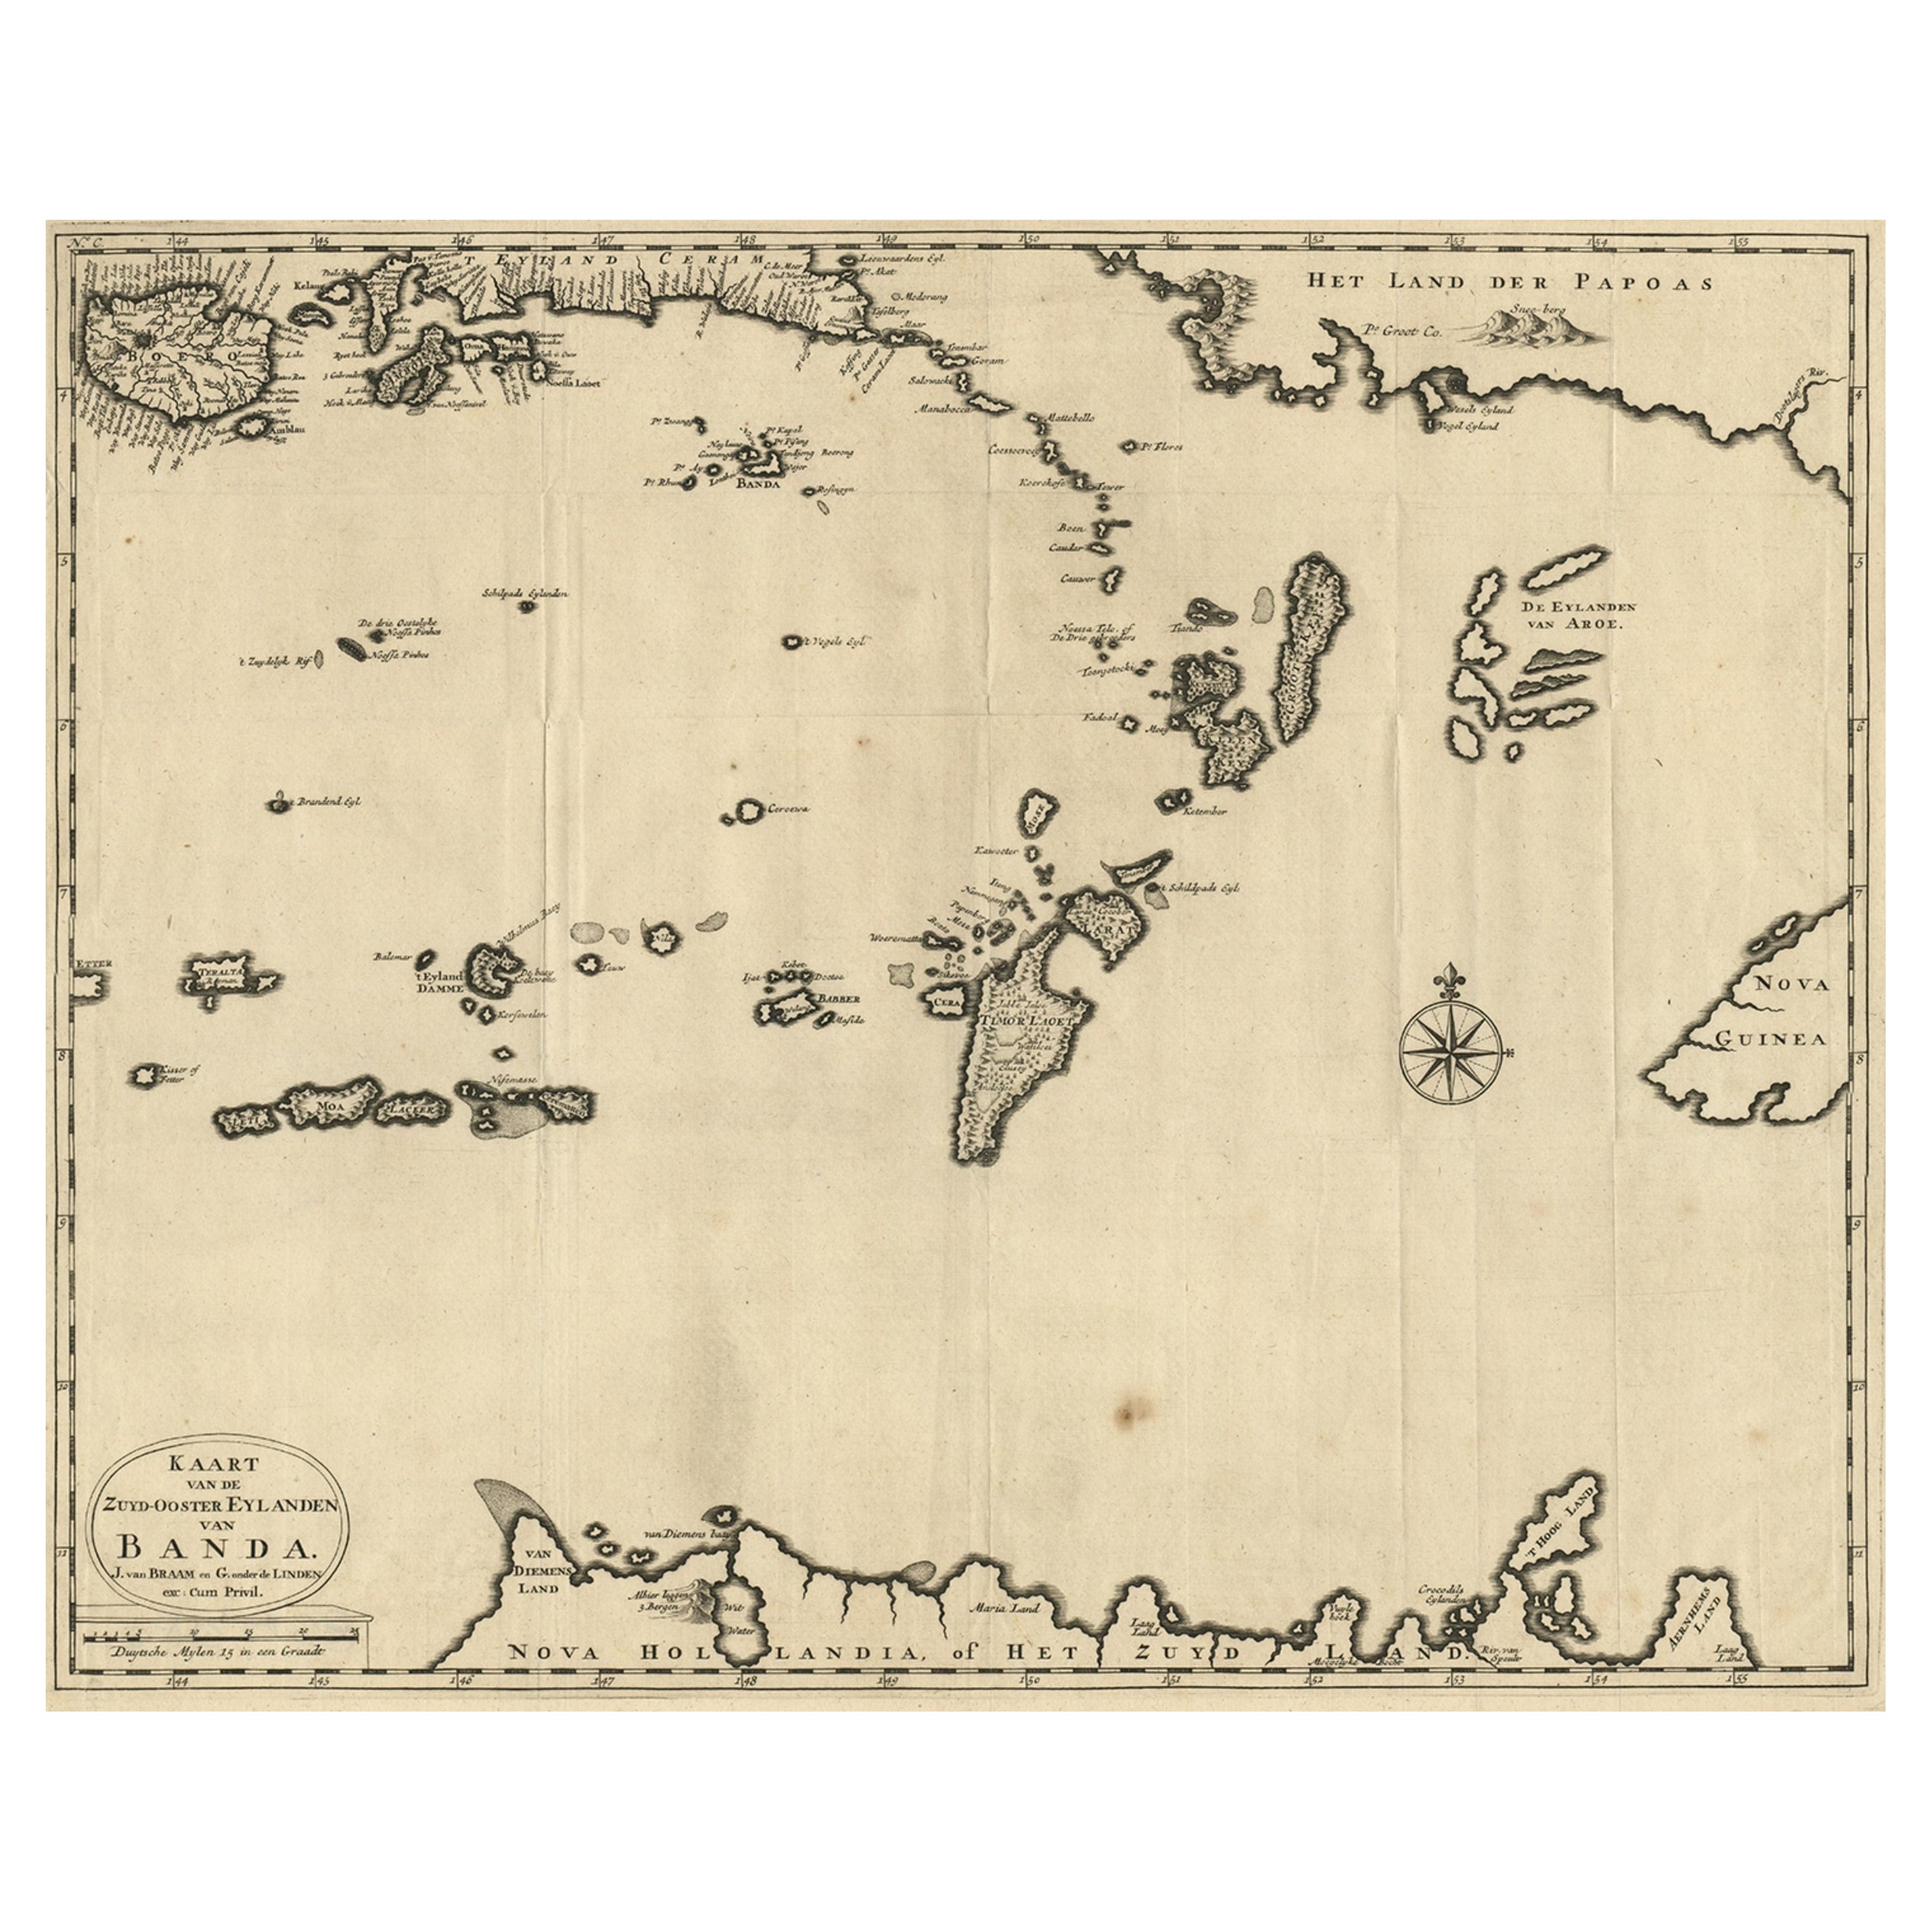 Map of the Southeastern Part of the Banda Islands, Incl Northern Australia, 1726